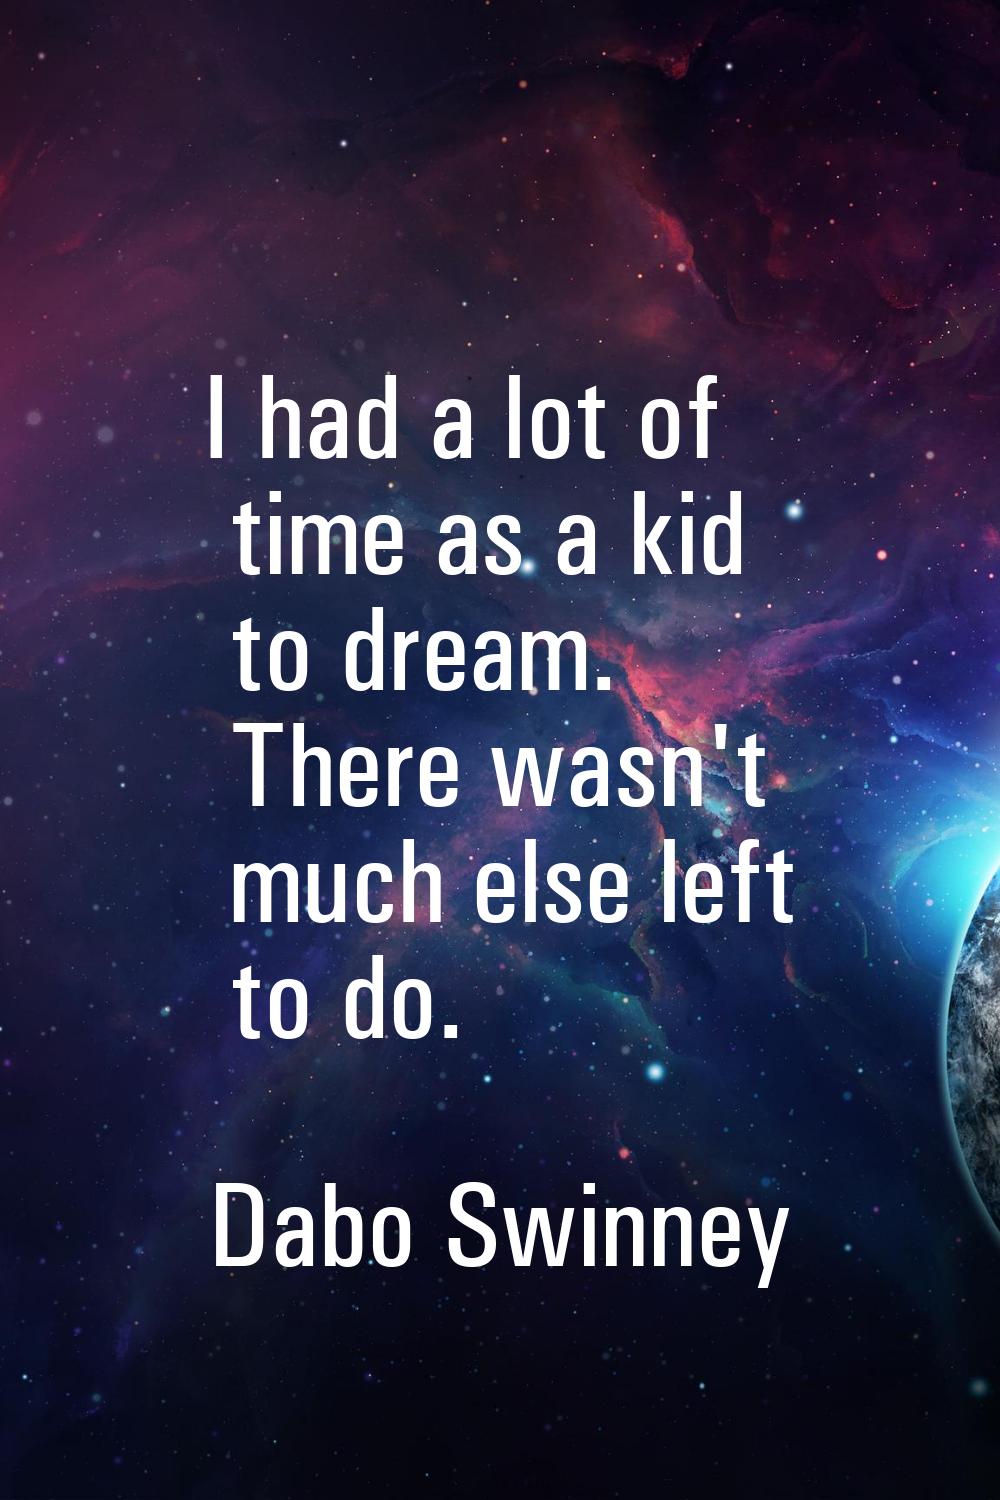 I had a lot of time as a kid to dream. There wasn't much else left to do.